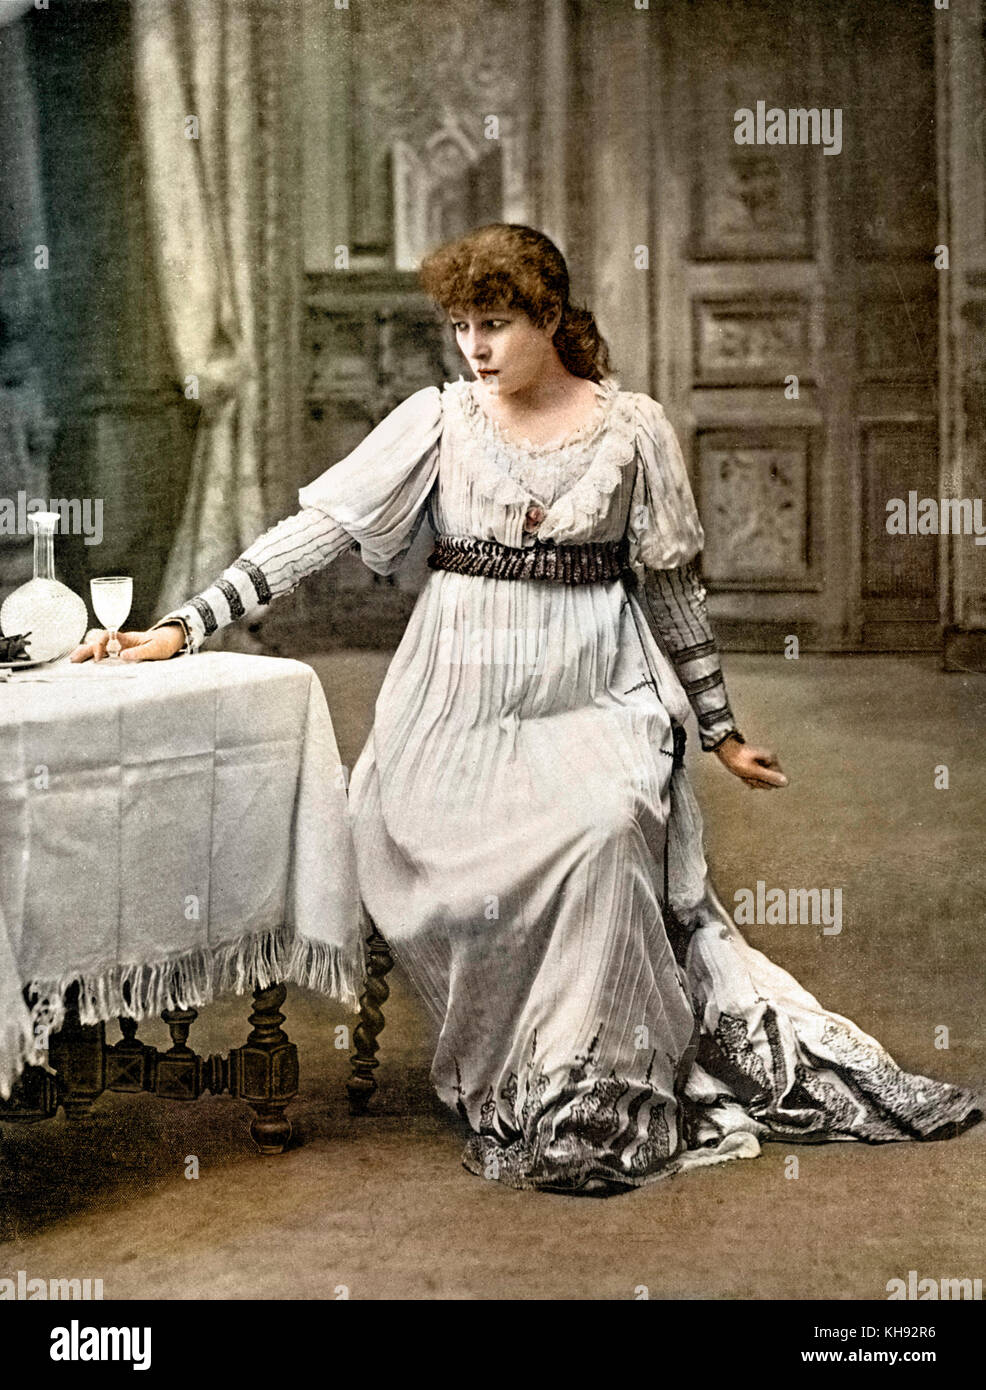 Sarah-Bernhardt in the role of Tosca in play by Victorien Sardou, in 1899, which inspired the creation of Puccini's opera, 'Tosca'. Stock Photo